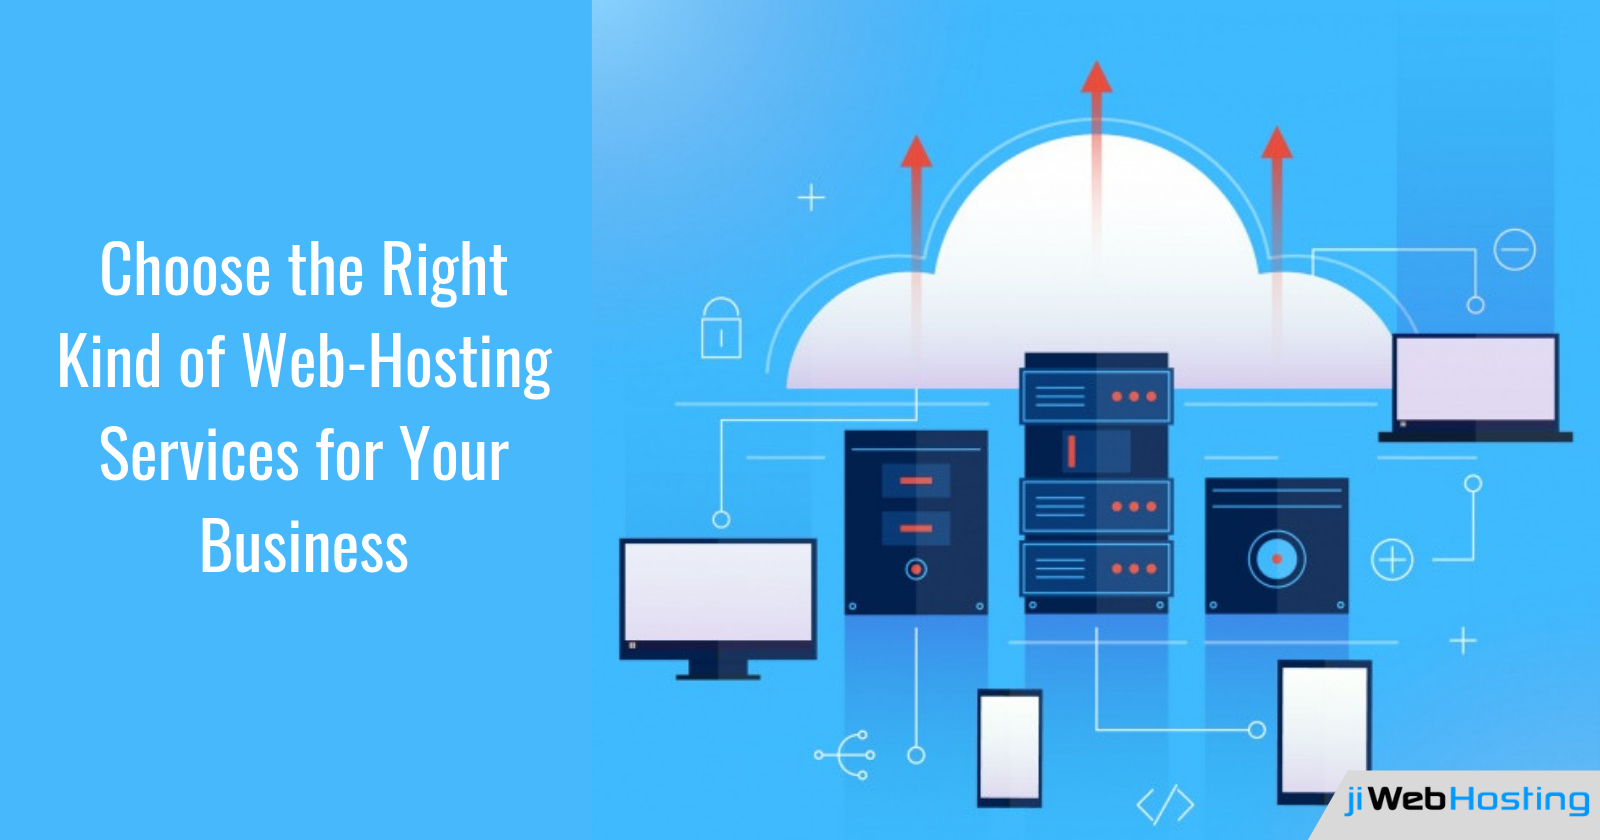 Choose the Right Kind of Web-Hosting Services for Your Business